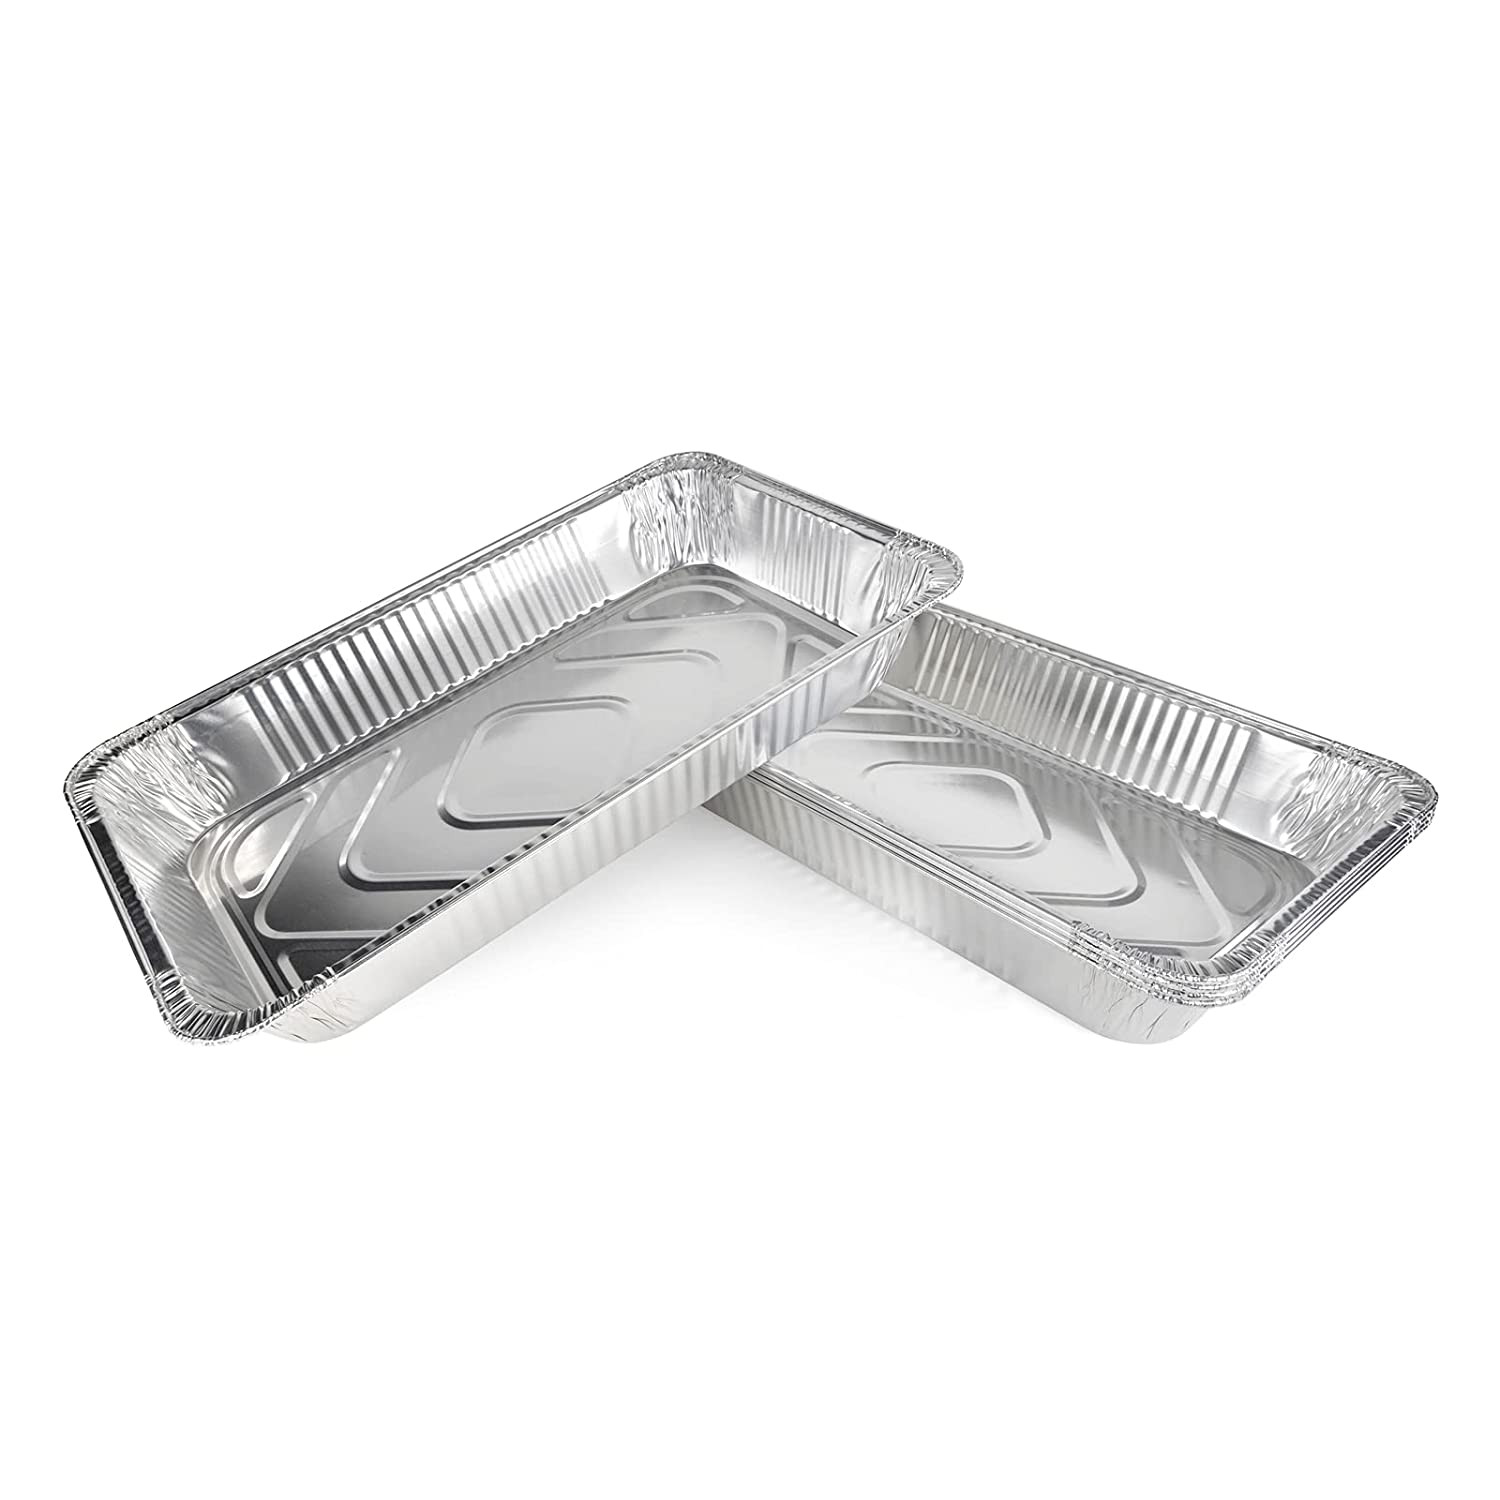 https://idlpack.com/image/cache/catalog/Products/Foil%20Pans%20and%20Trays/61wOckQmI7L._SL1500_-1500x1500.jpg